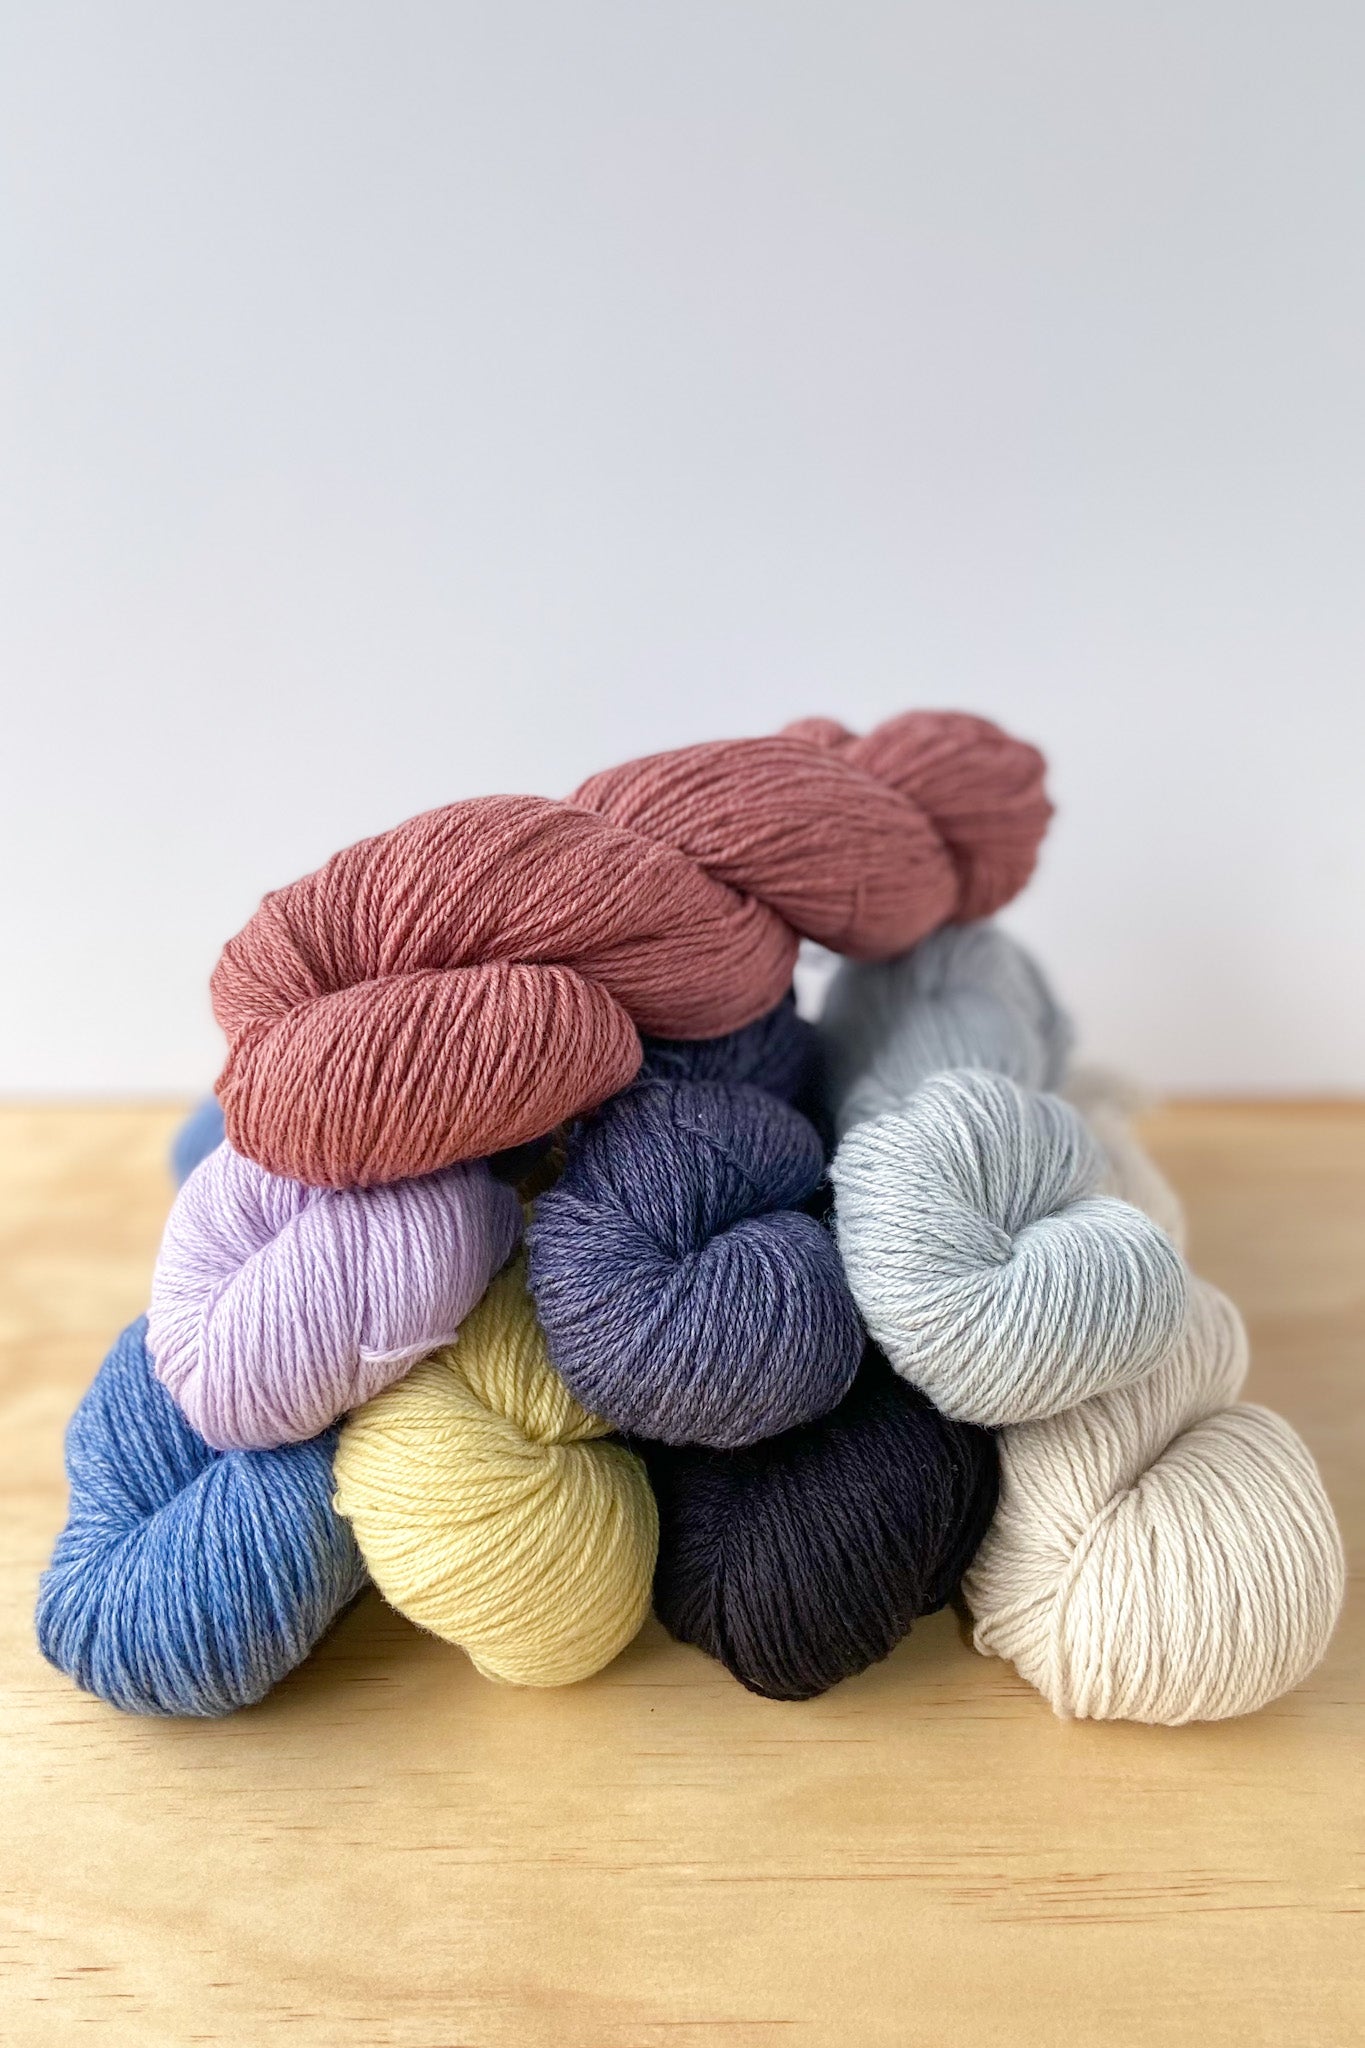 8 skeins of BC GARN Bio Balance 4ply organic cotton and organic wool knitting yarn in rust, violet, jeans, graphite, greenish yellow, black, silver and natural white.